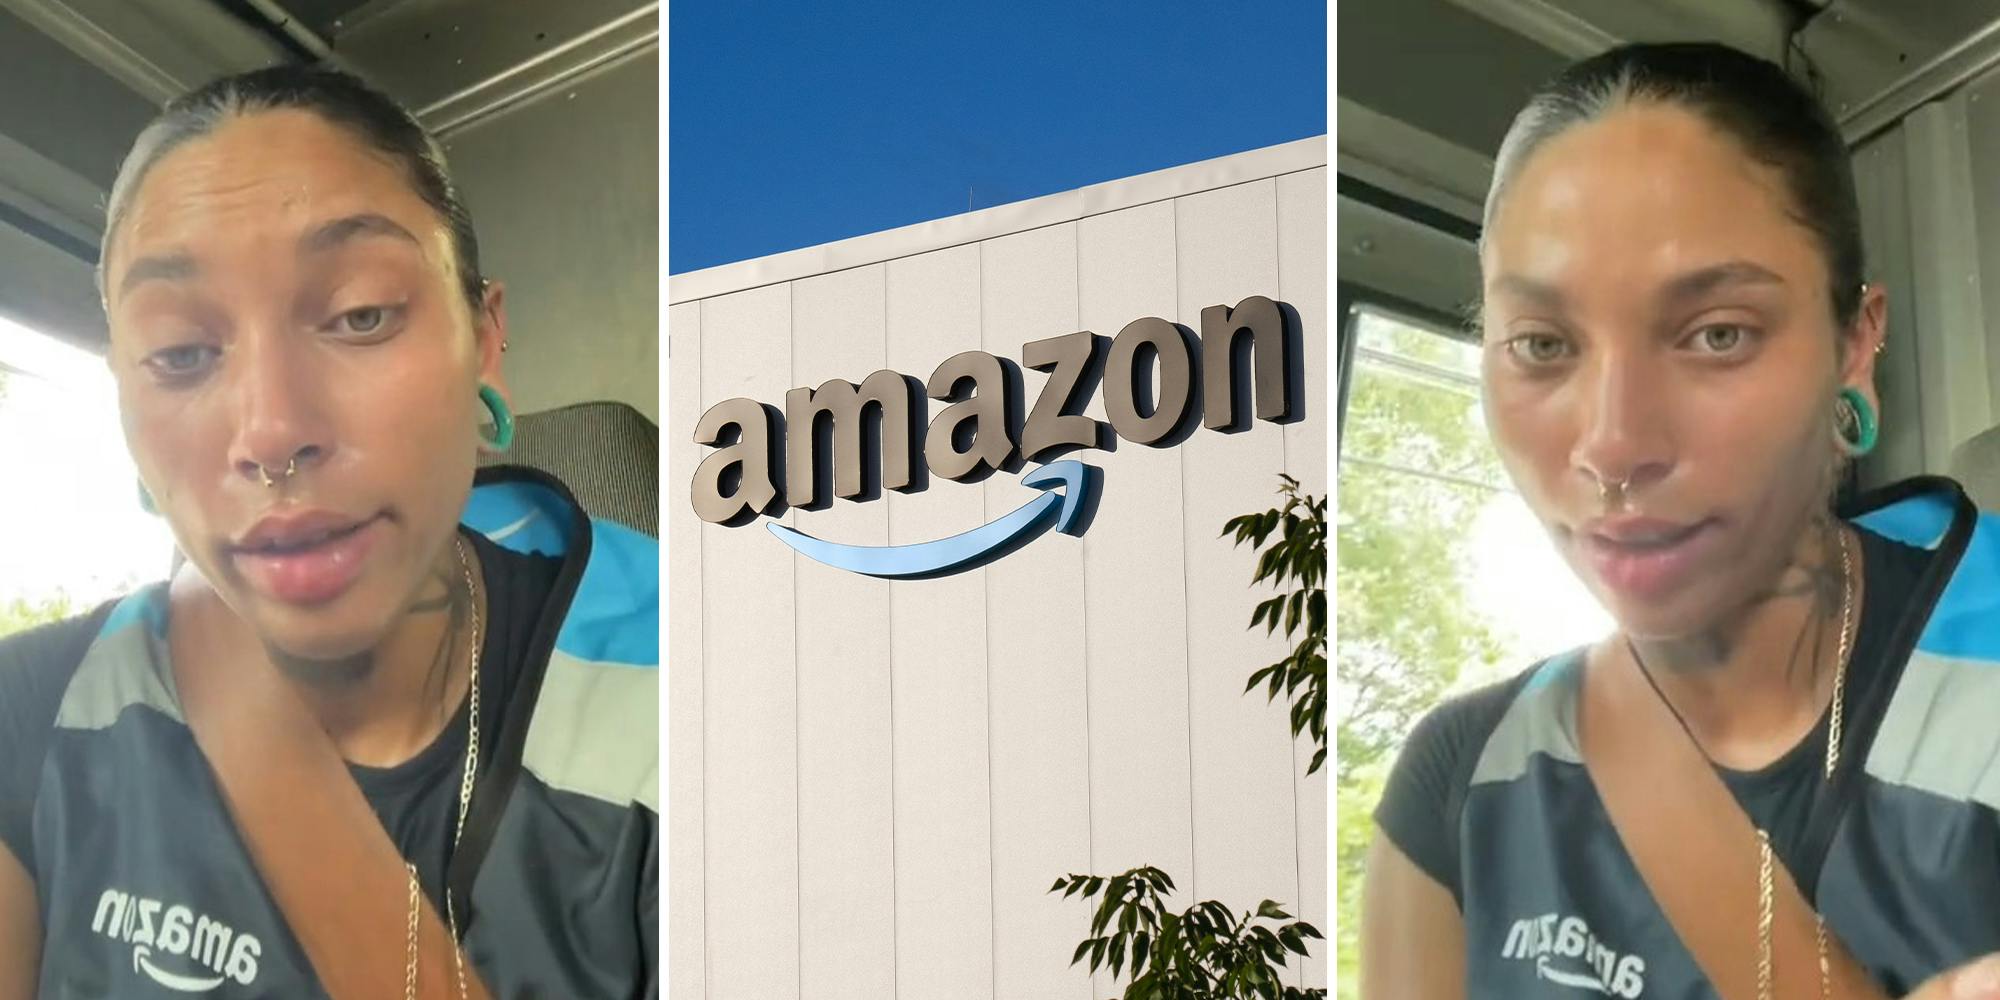 Amazon delivery driver turns on AC while reliving in 90-degree heat. It blows hot air